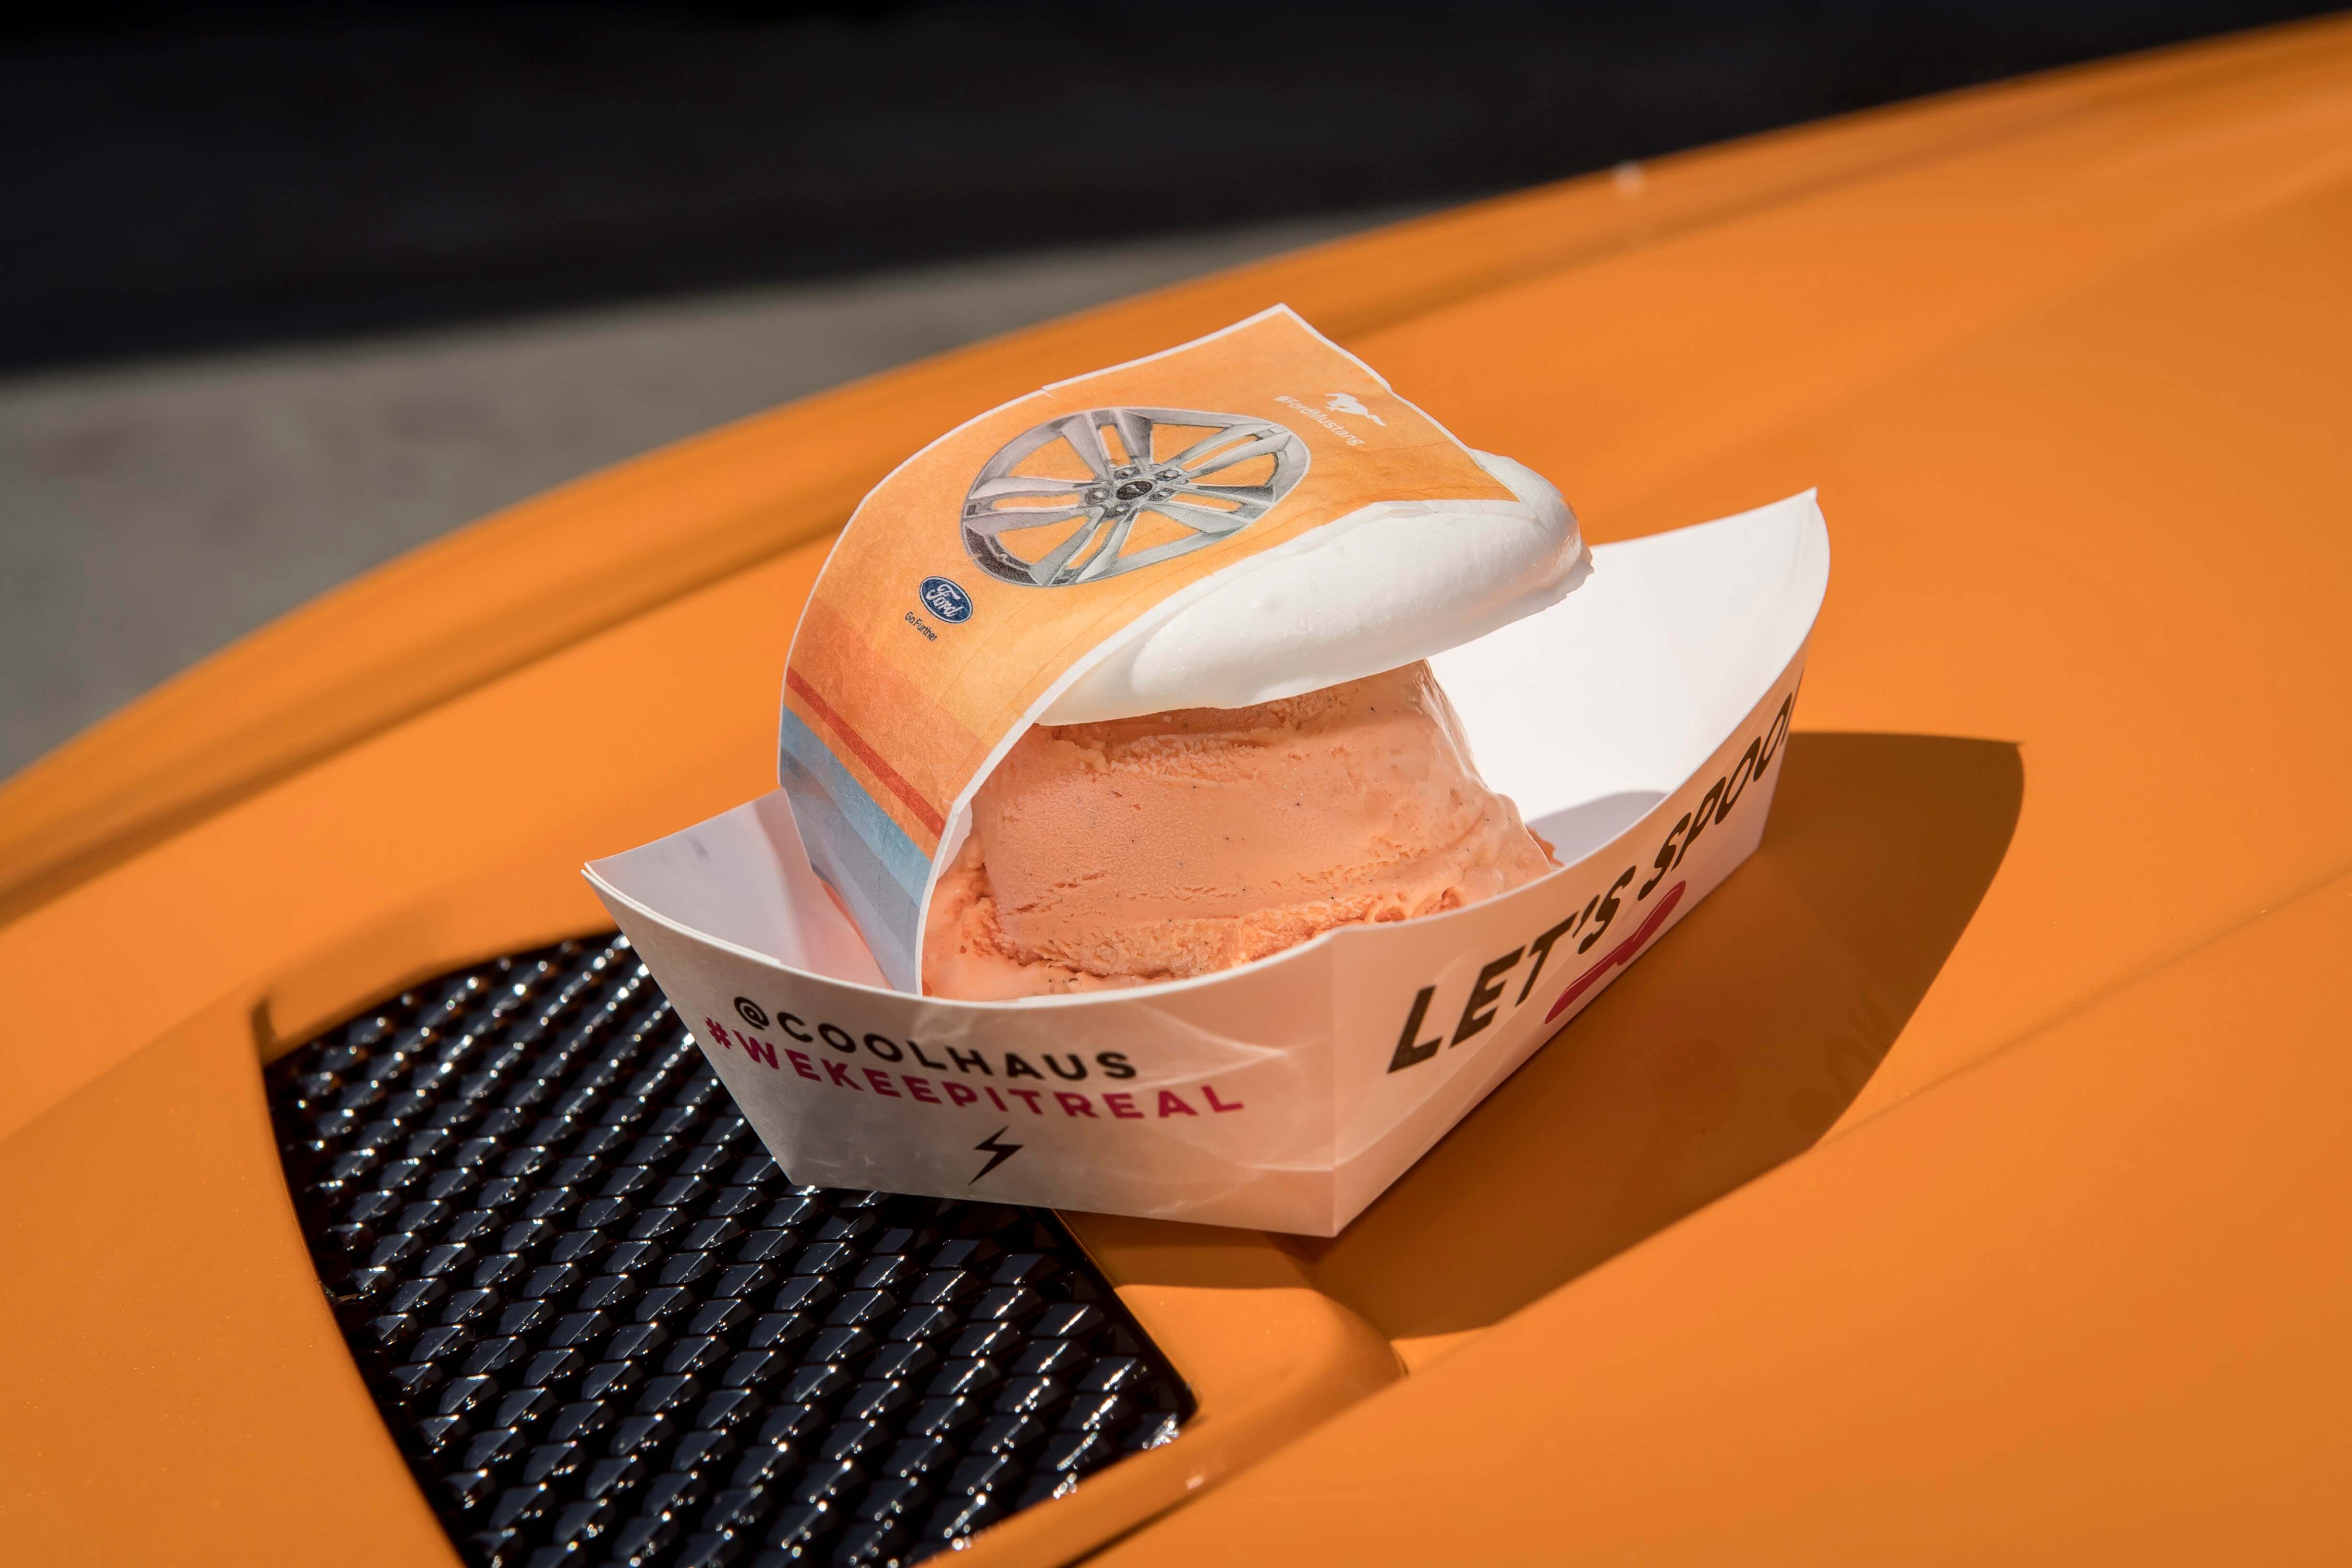 Ford Creates Mustang-inspired Orange Fury Ice Cream Sandwich From Coolhaus